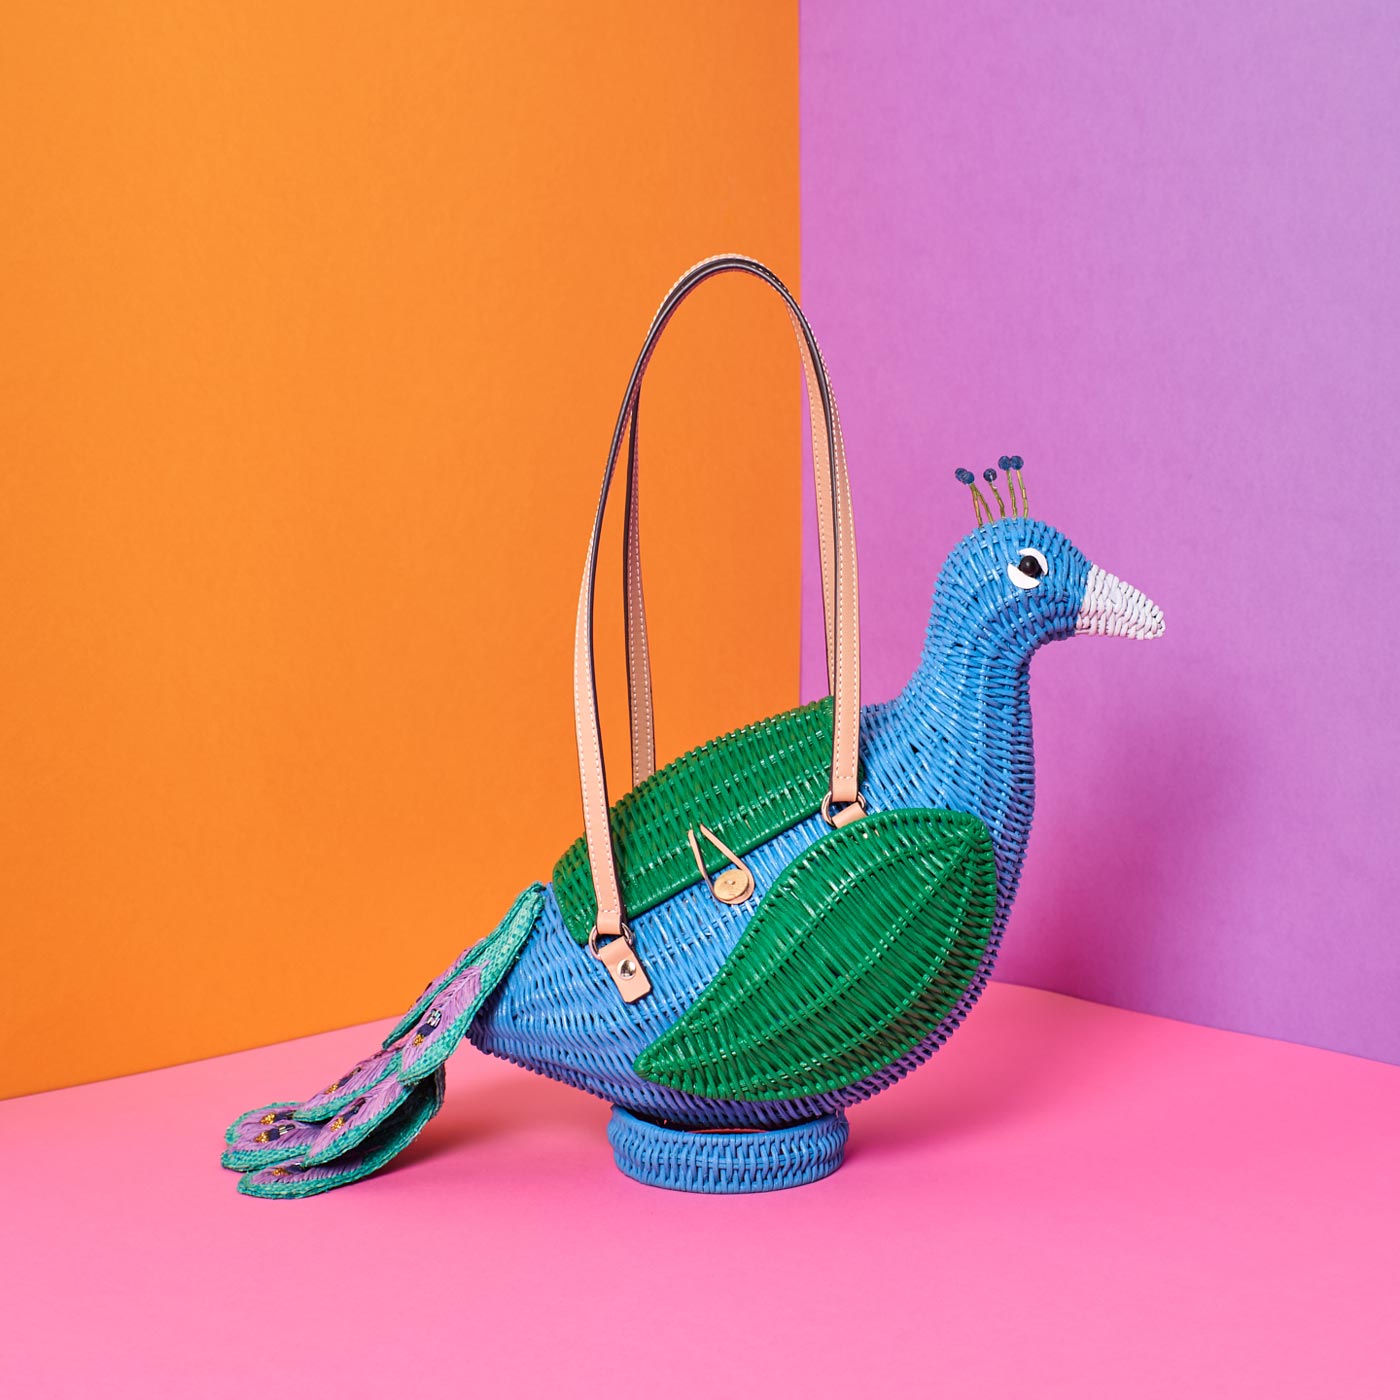 Wicker Darling percy peacock tail purse wicker bag sits in a colourful background